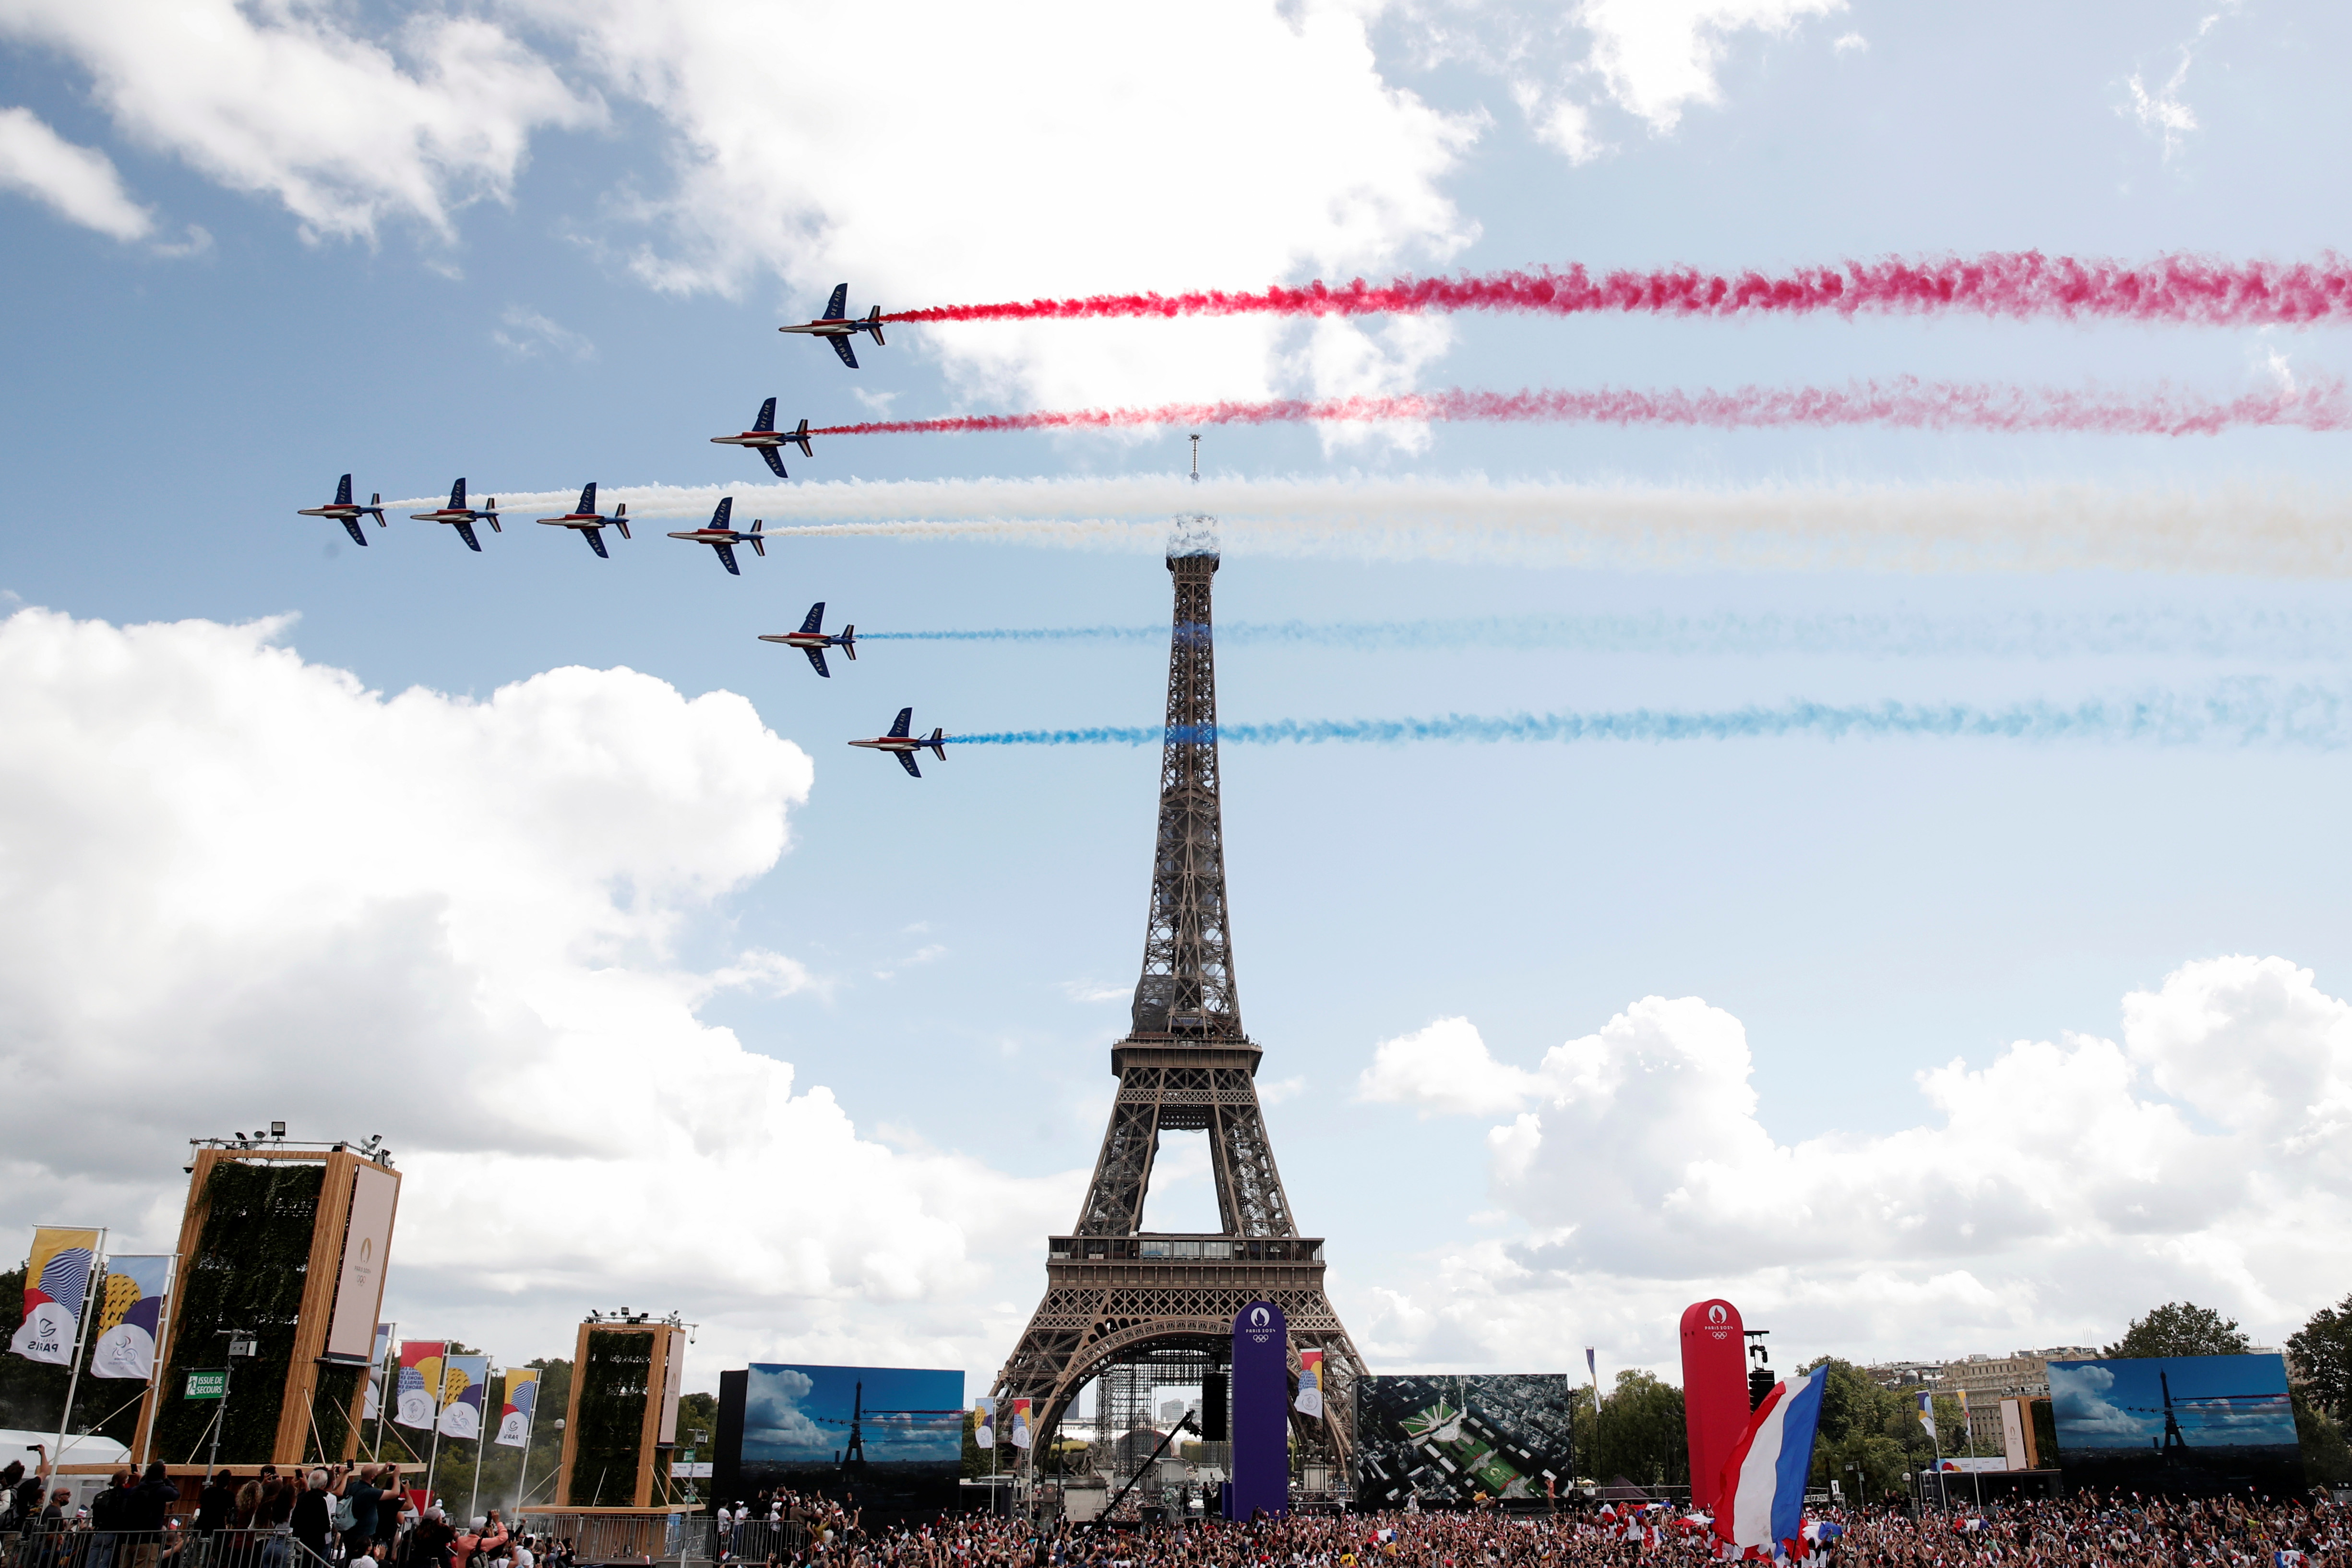 Alpha jets from the French Air Force Patrouille de France fly past Eiffel Tower at Paris' Olympics fan zone during the closing ceremony of the Tokyo games, at Trocadero Gardens in Paris, France, August 8, 2021. REUTERS/Benoit Tessier